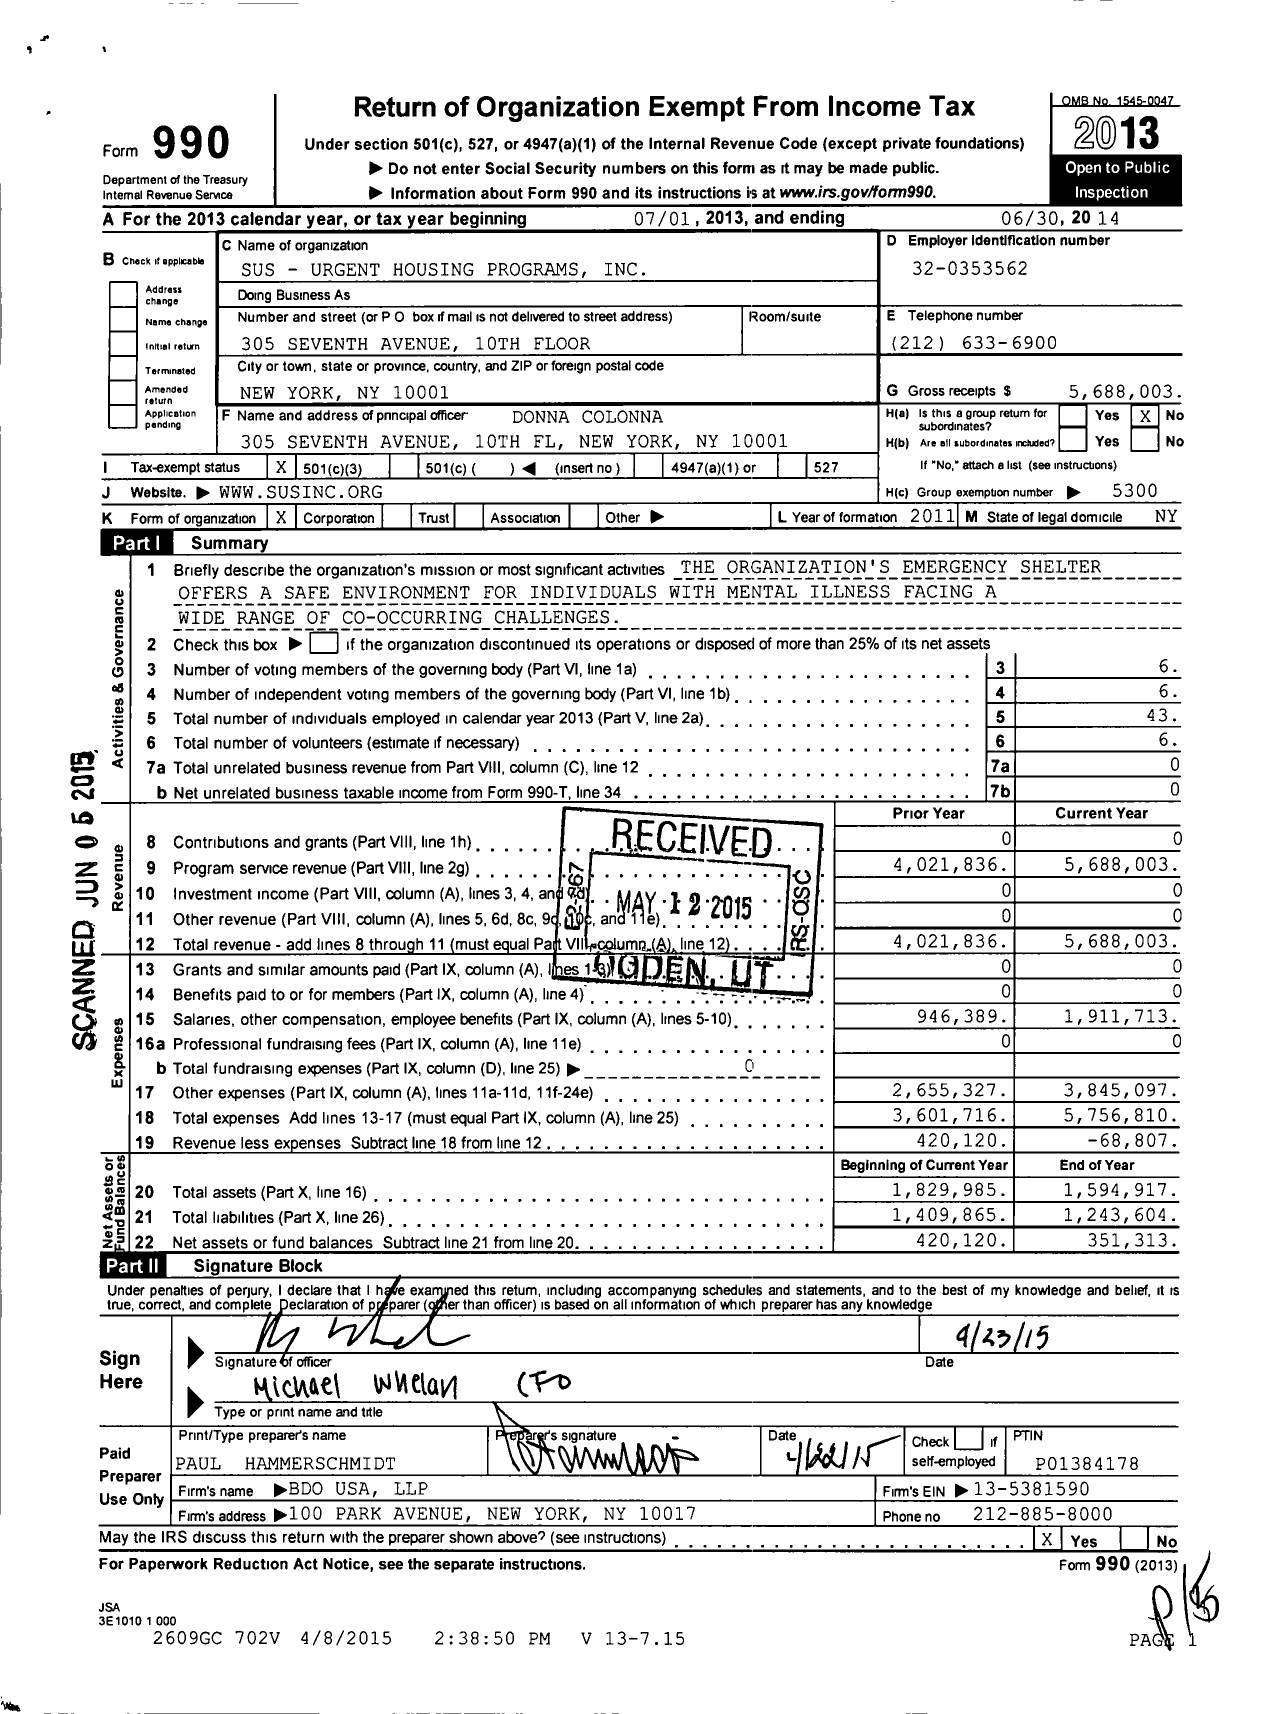 Image of first page of 2013 Form 990 for Sus - Urgent Housing Programs